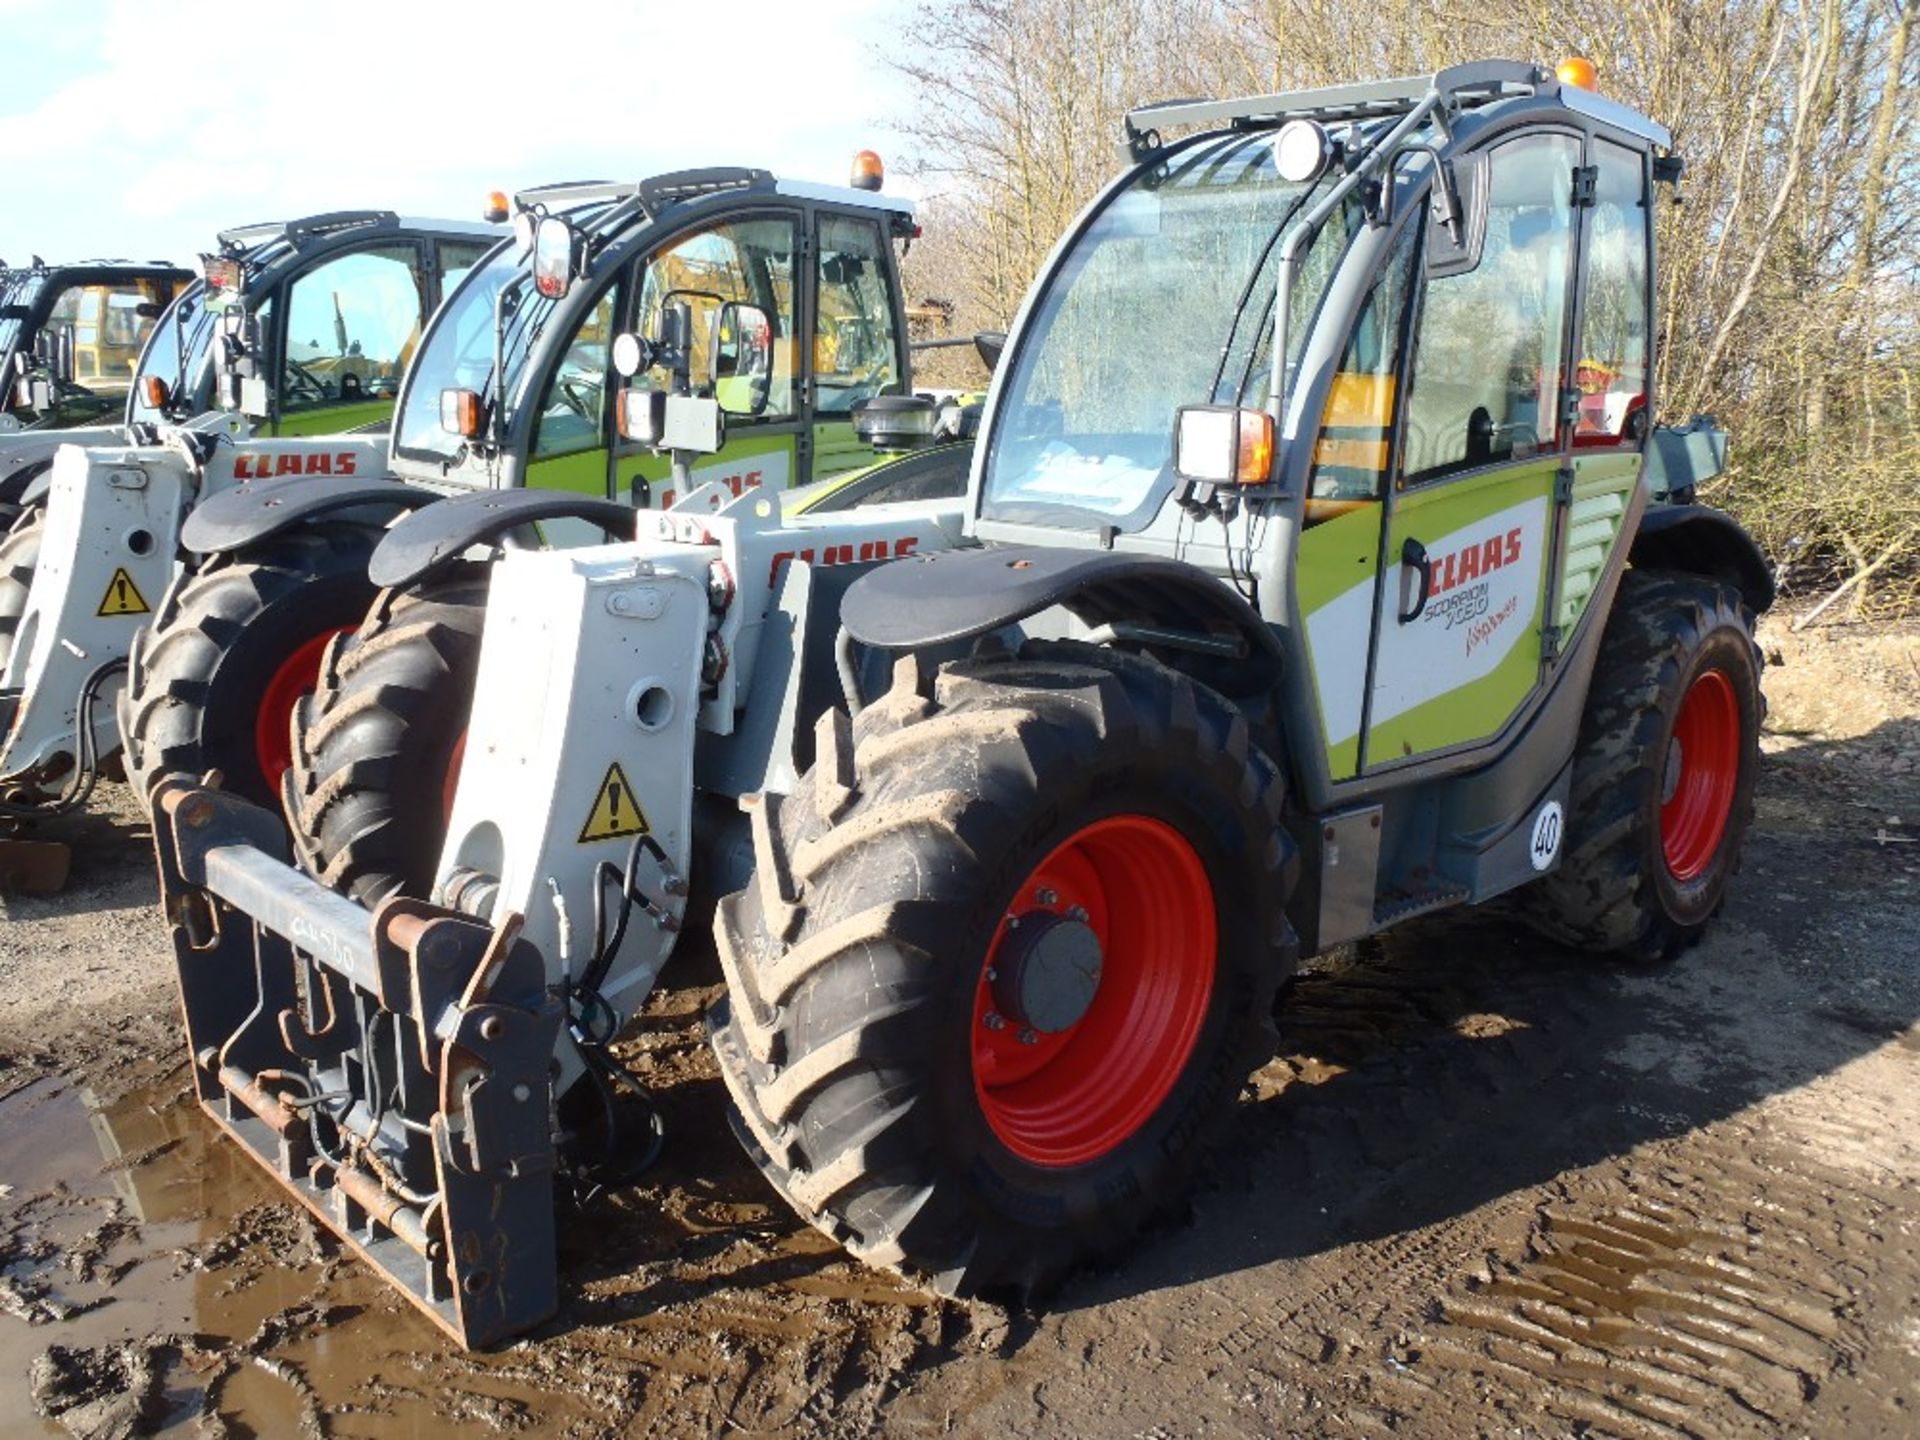 2009 Claas Scorpion 7030 3.5 Ton 7m Telehandler with Pick Up Hitch, Boom Suspension, JCB Headstock